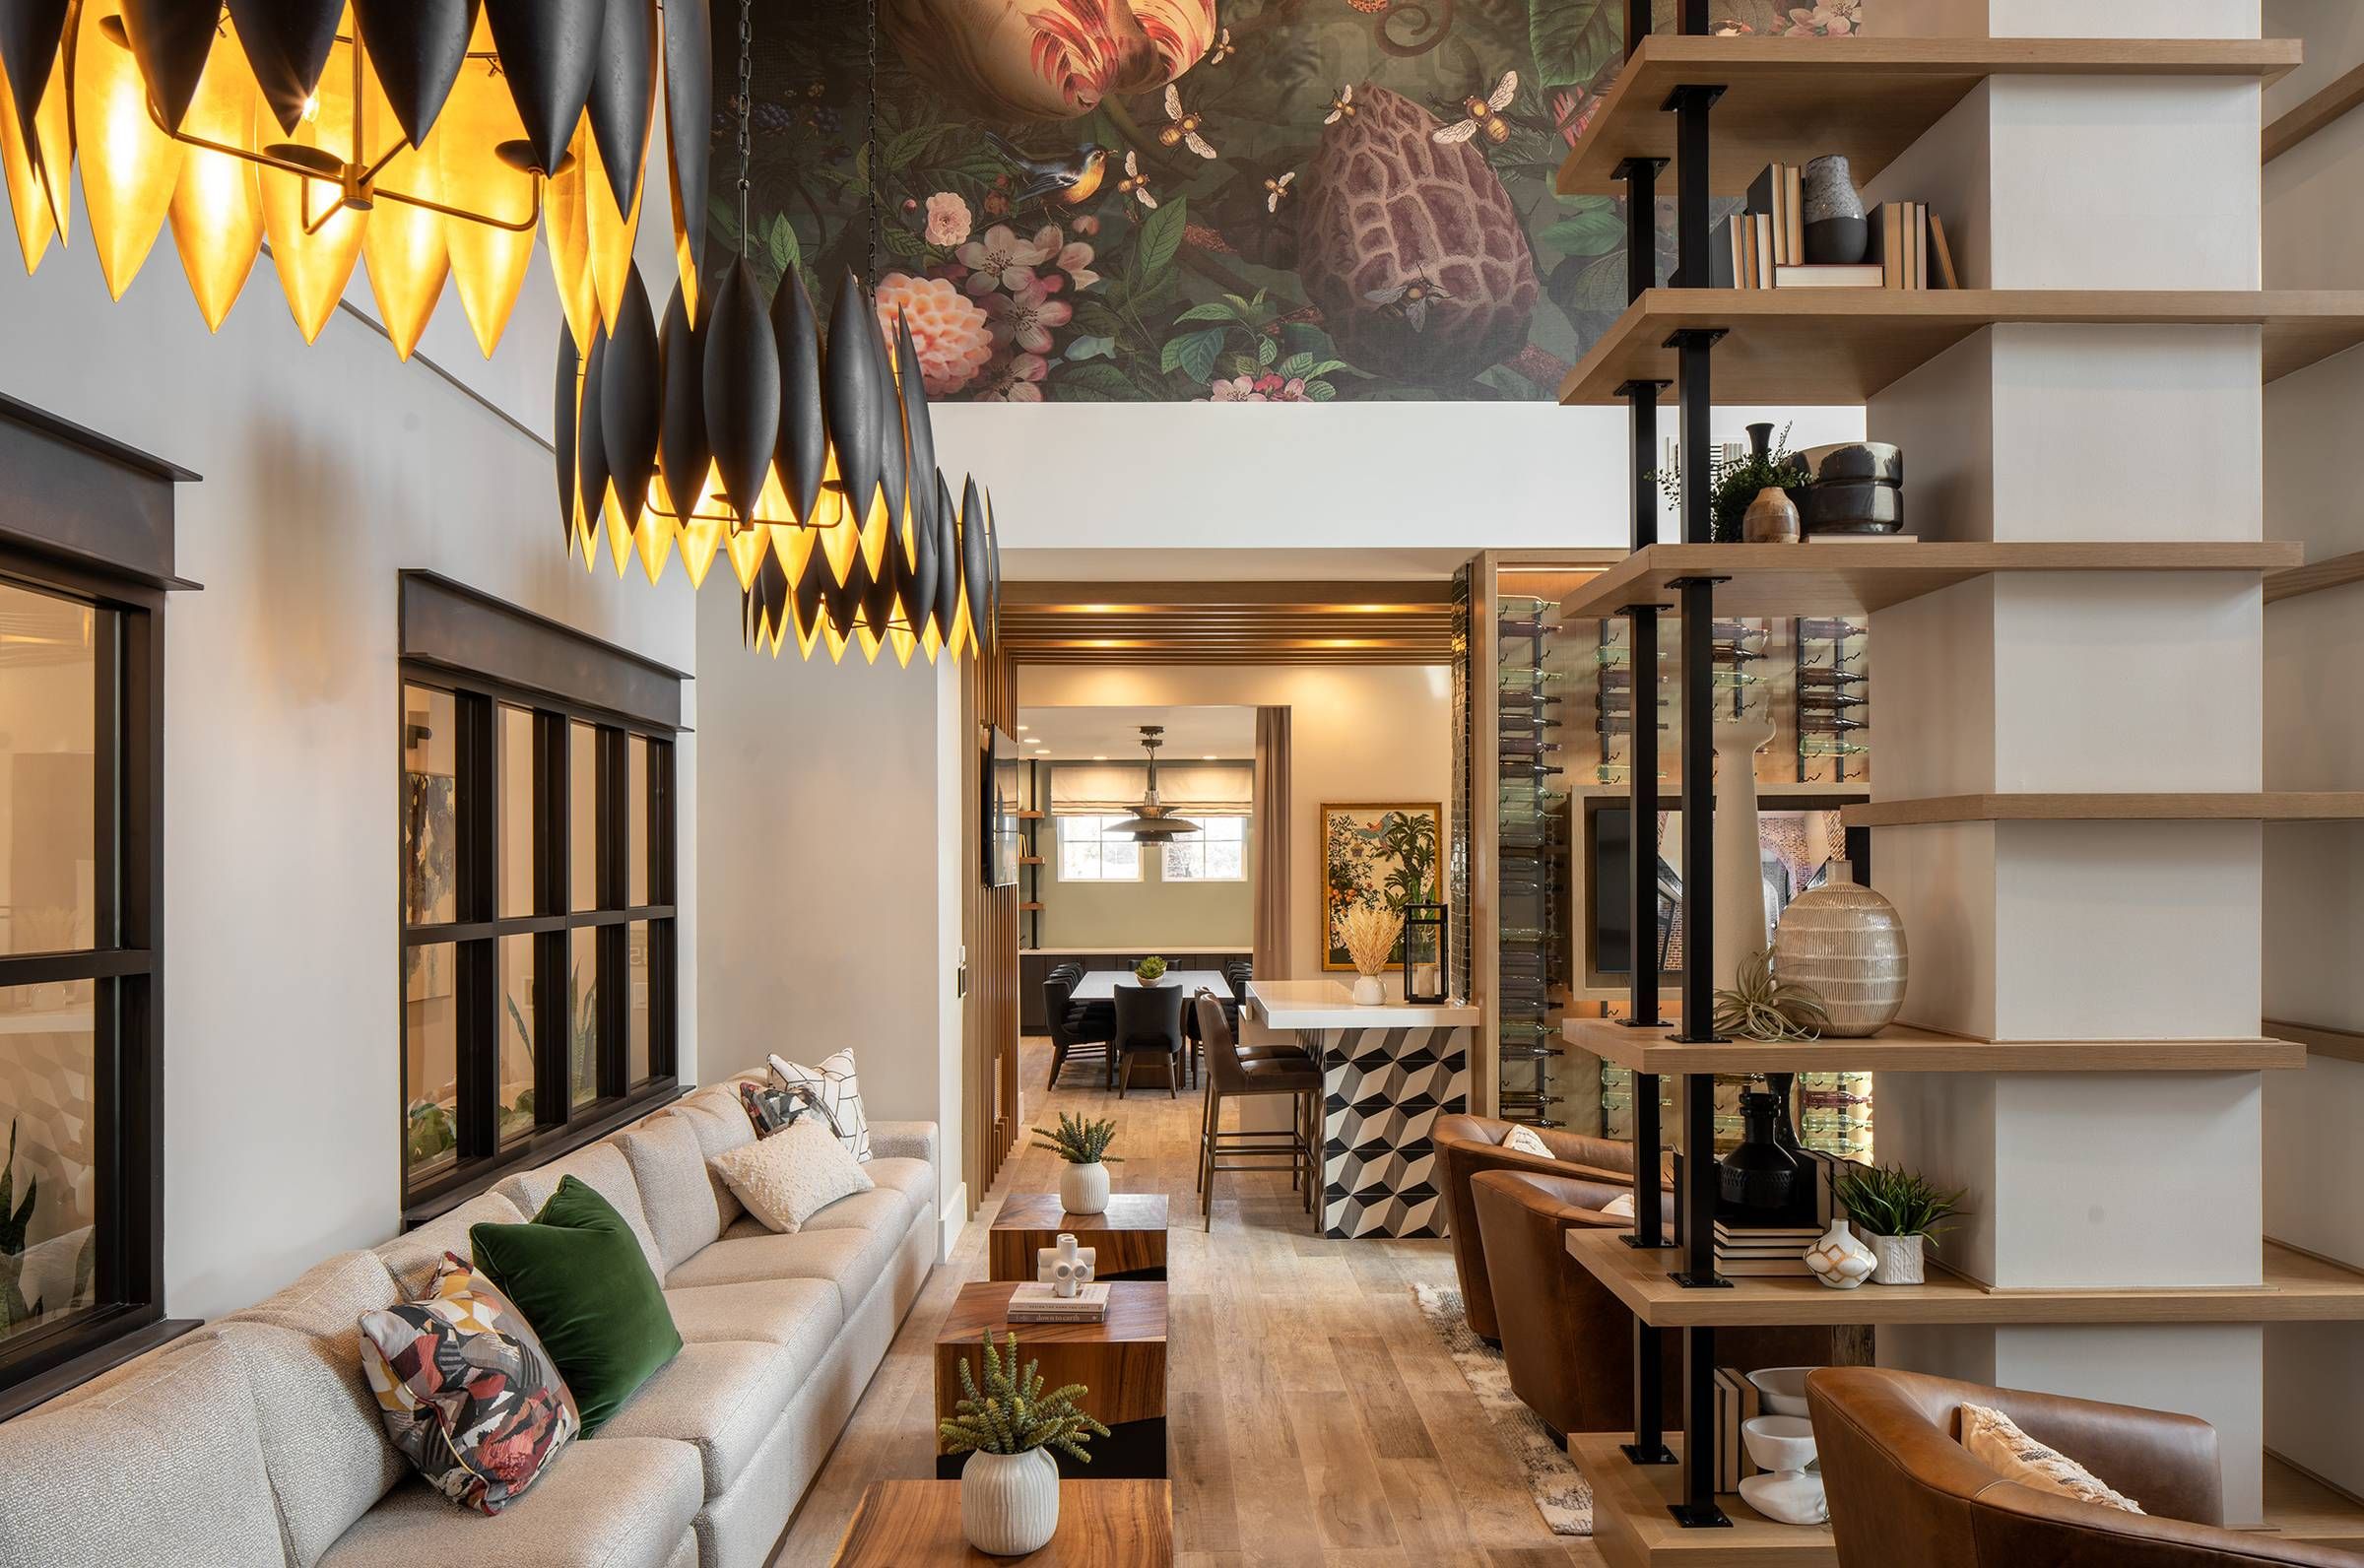 Vacant Landscape: A chic and stylish lounge at Alta Winter Garden with distinctive pendant lighting and an expansive mural, providing a warm communal space.